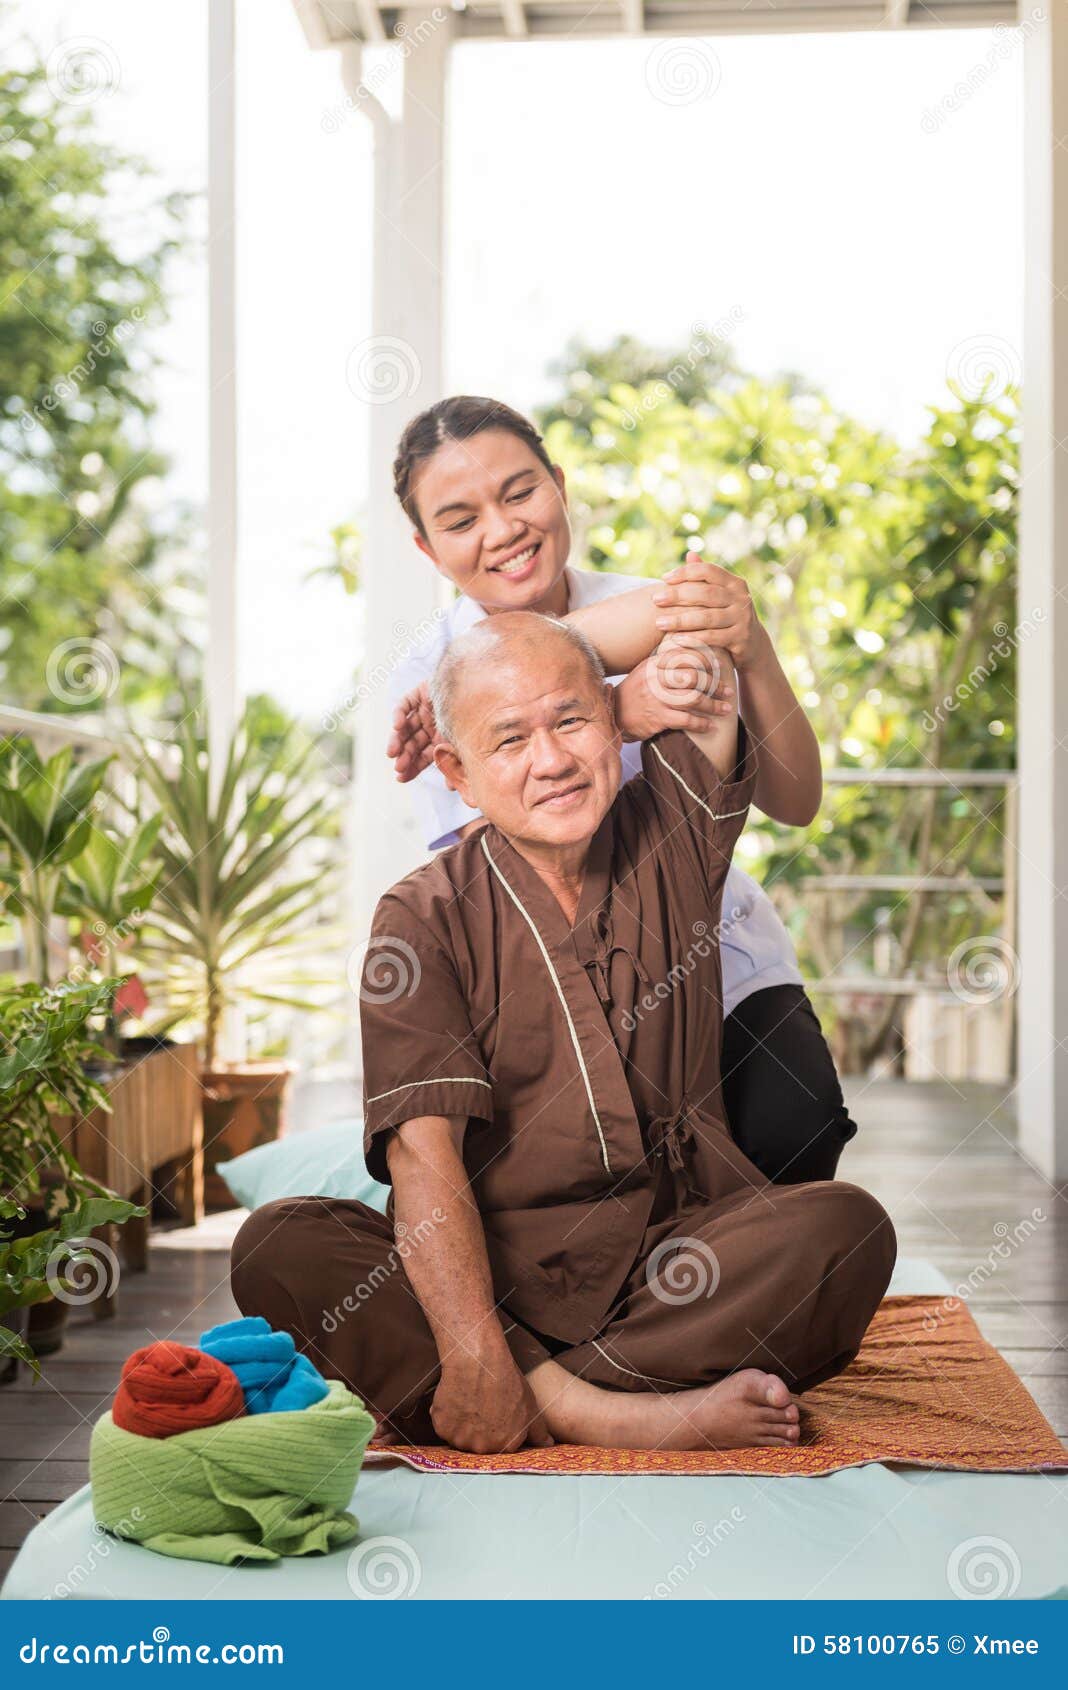 Therapist Giving Massage To Senior Male Patient Stock